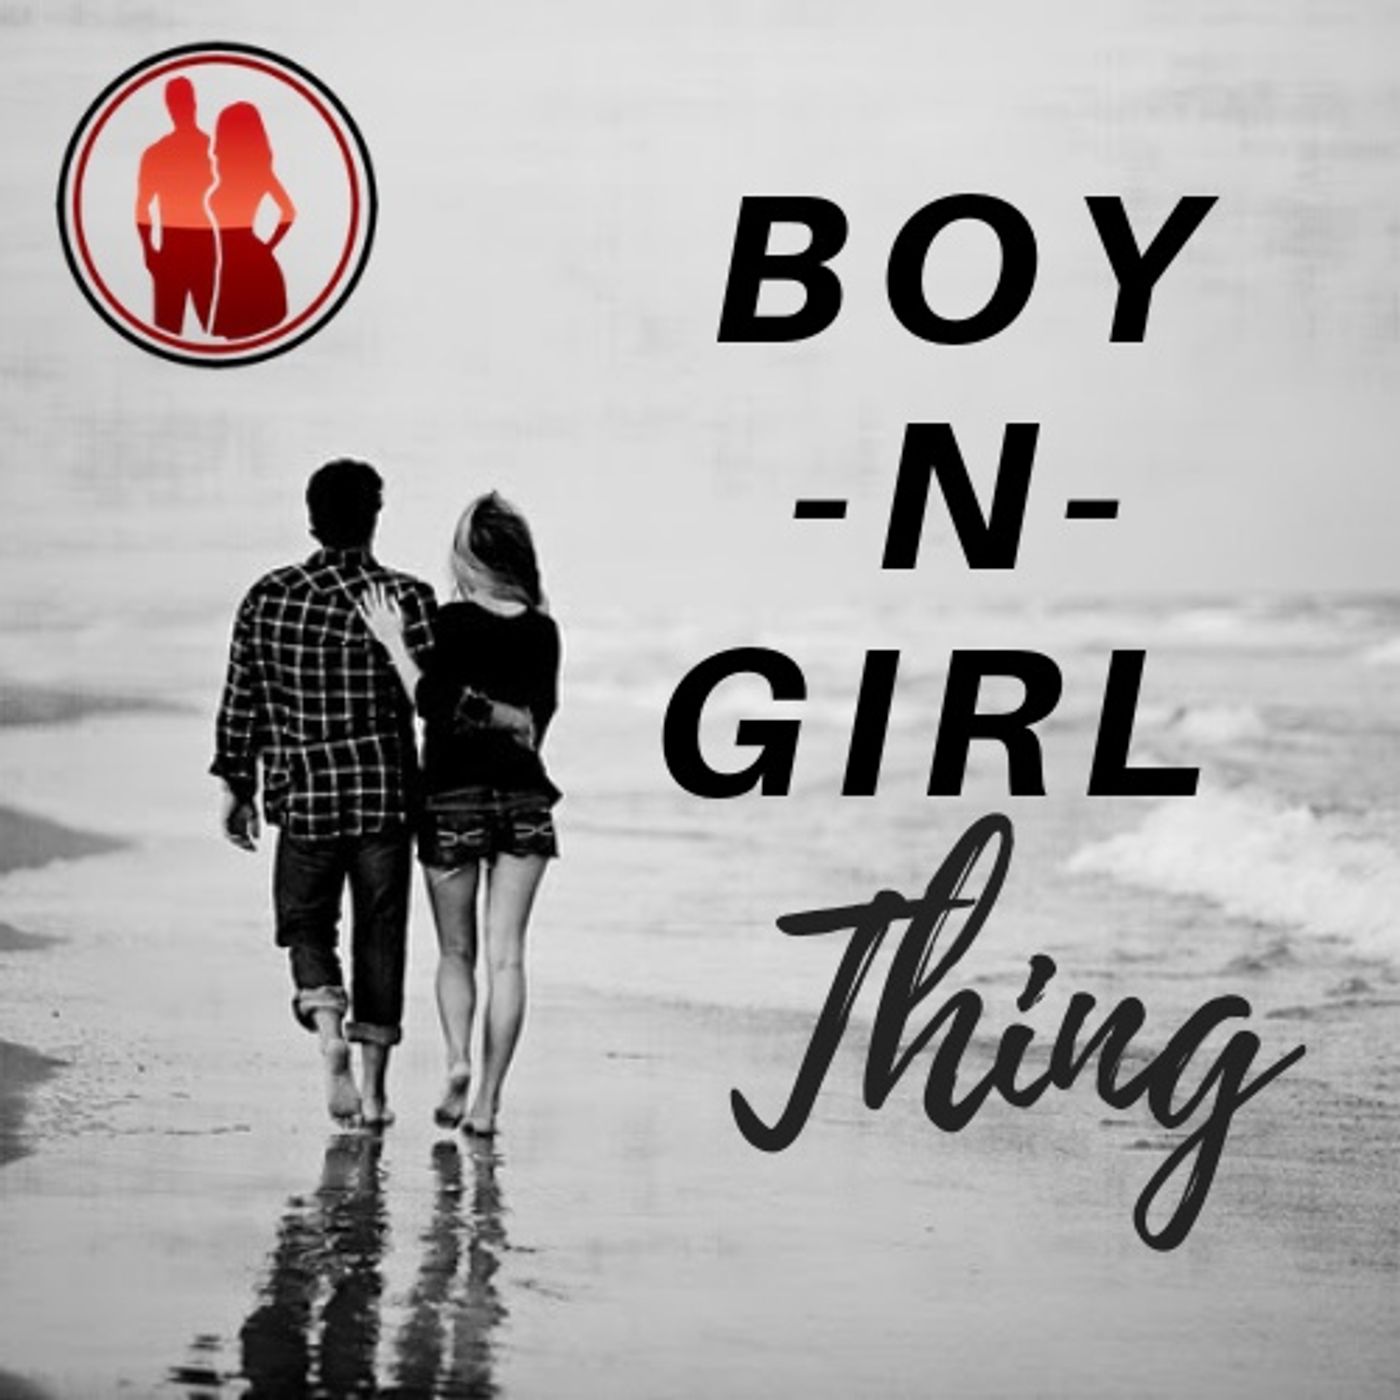 Boy N Girl Show - Sexes Difference